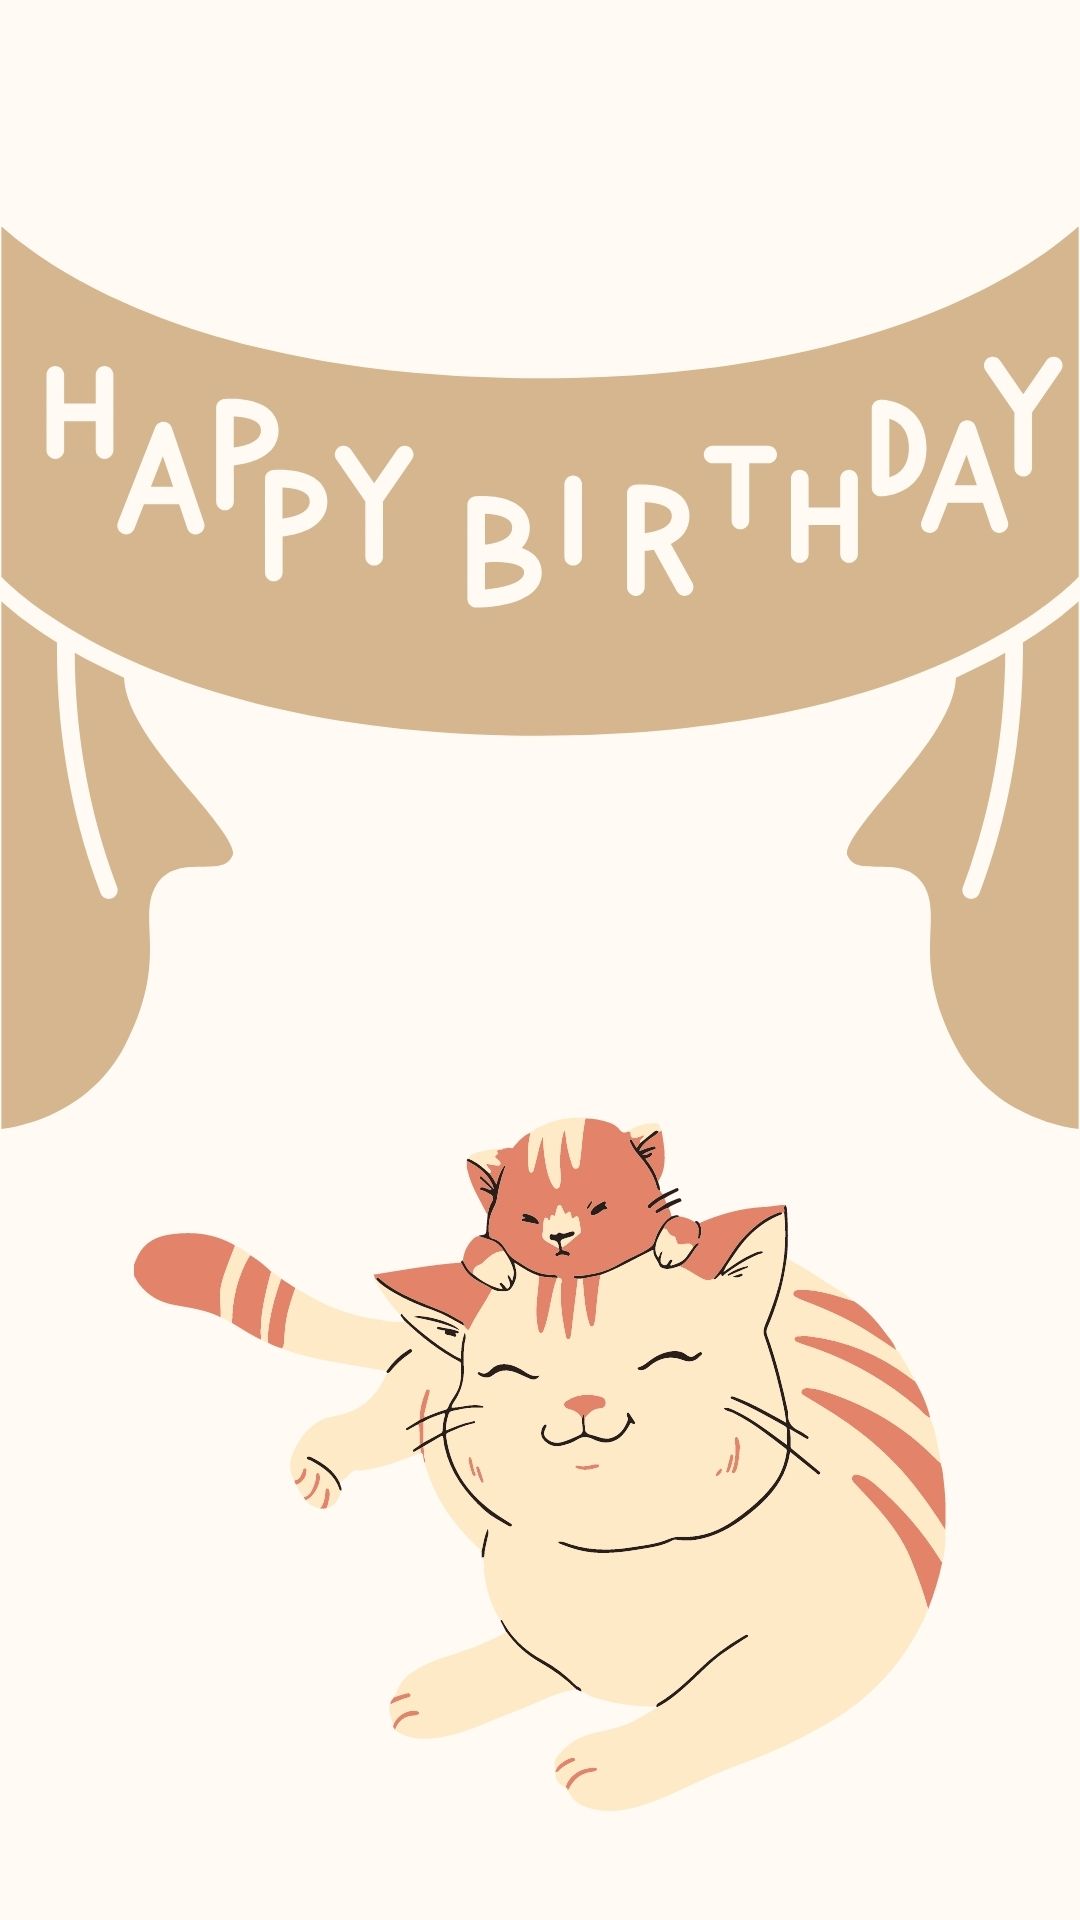 happy birthday cats illustration images free download